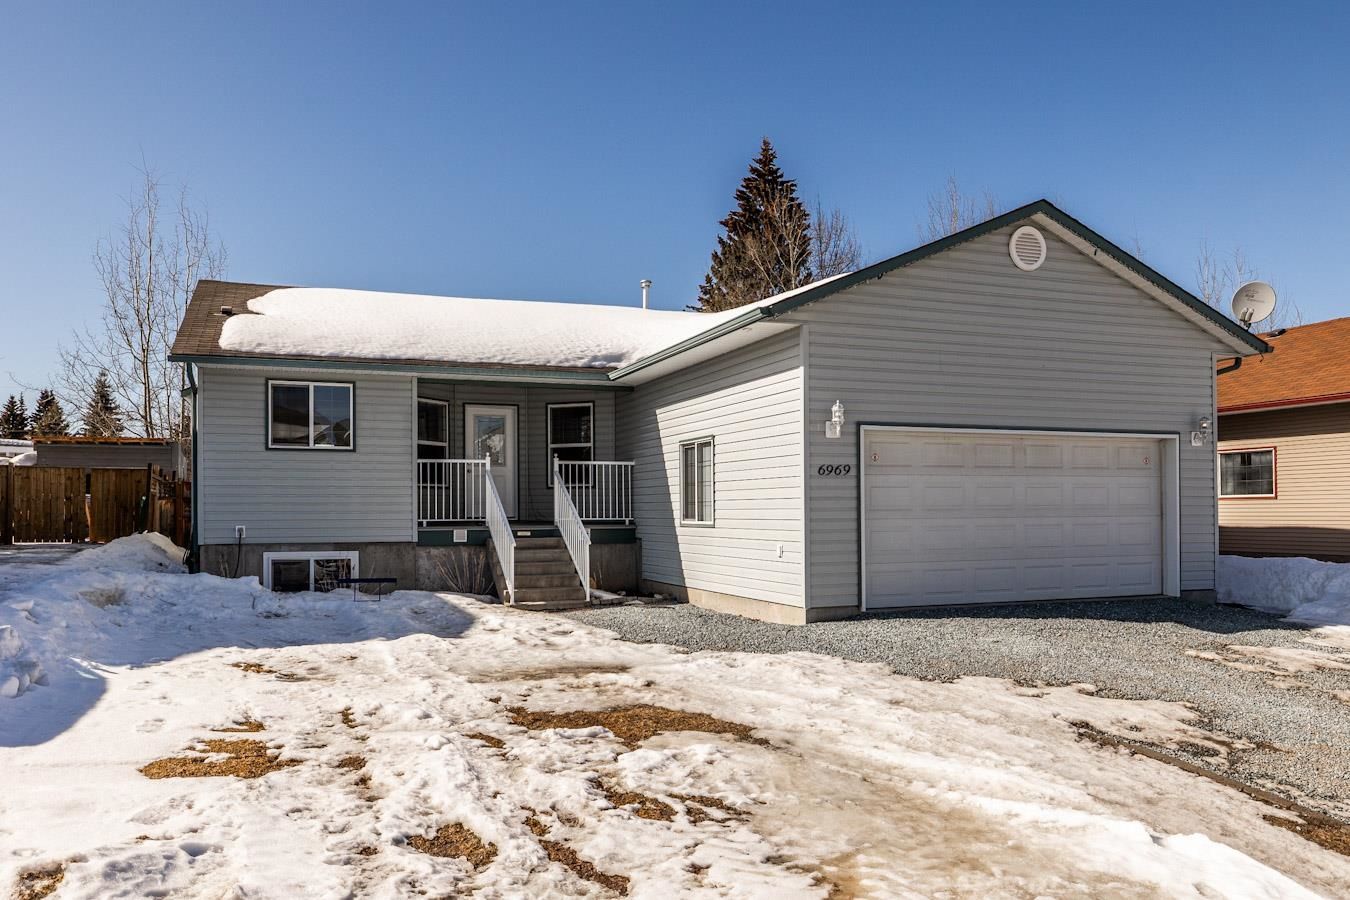 Main Photo: 6969 EUGENE Road in Prince George: Lafreniere & Parkridge House for sale (PG City South West)  : MLS®# R2761328